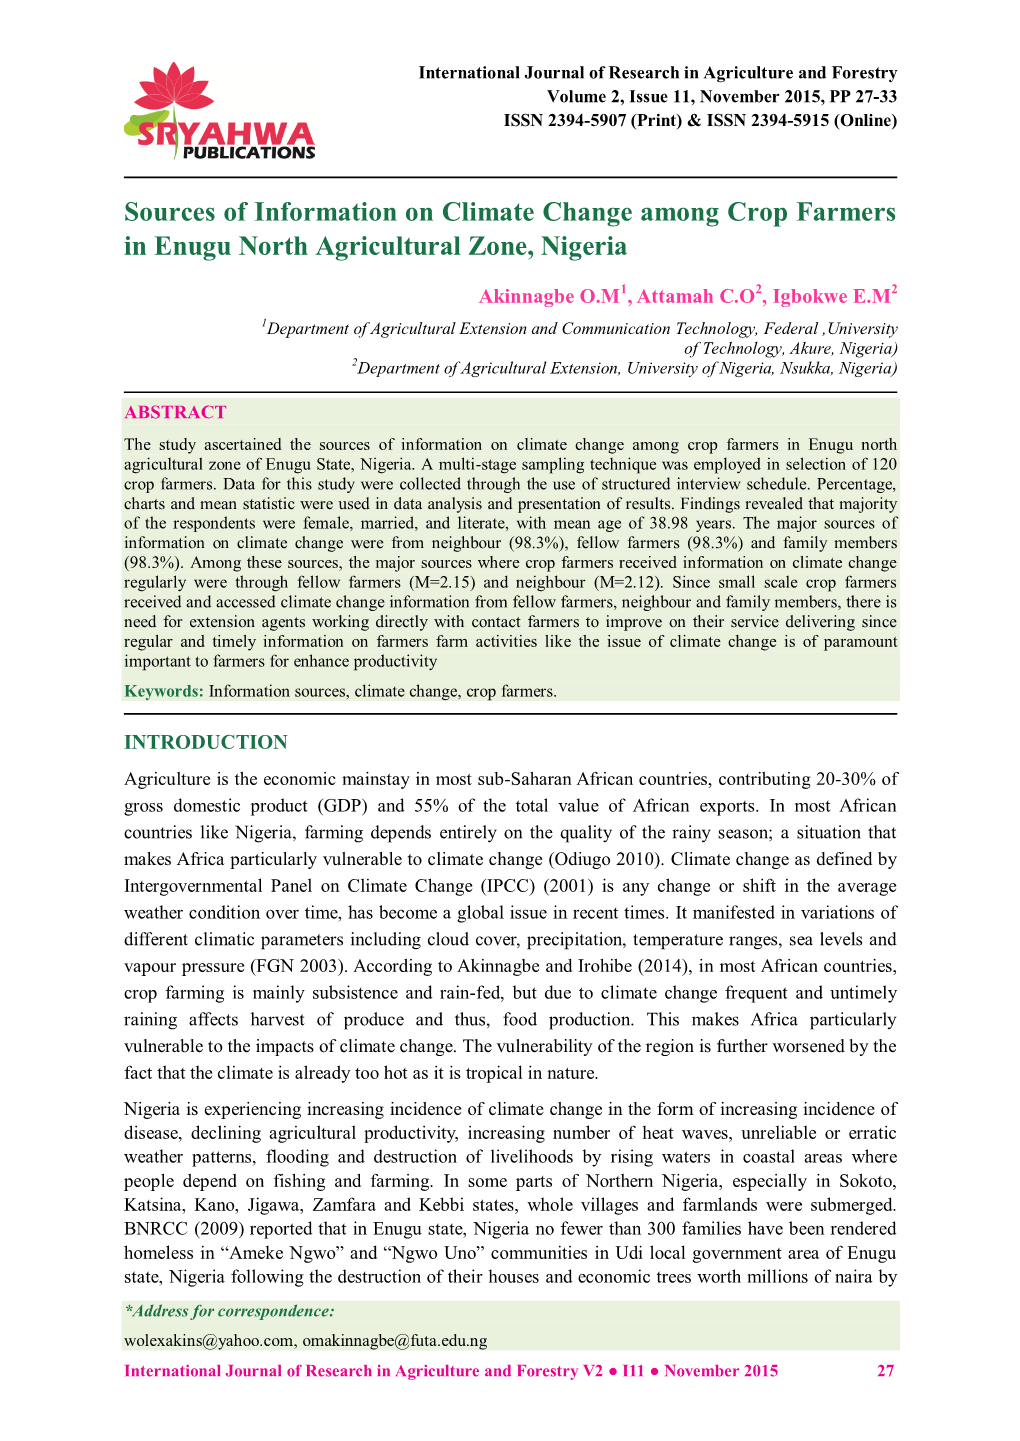 Sources of Information on Climate Change Among Crop Farmers in Enugu North Agricultural Zone, Nigeria